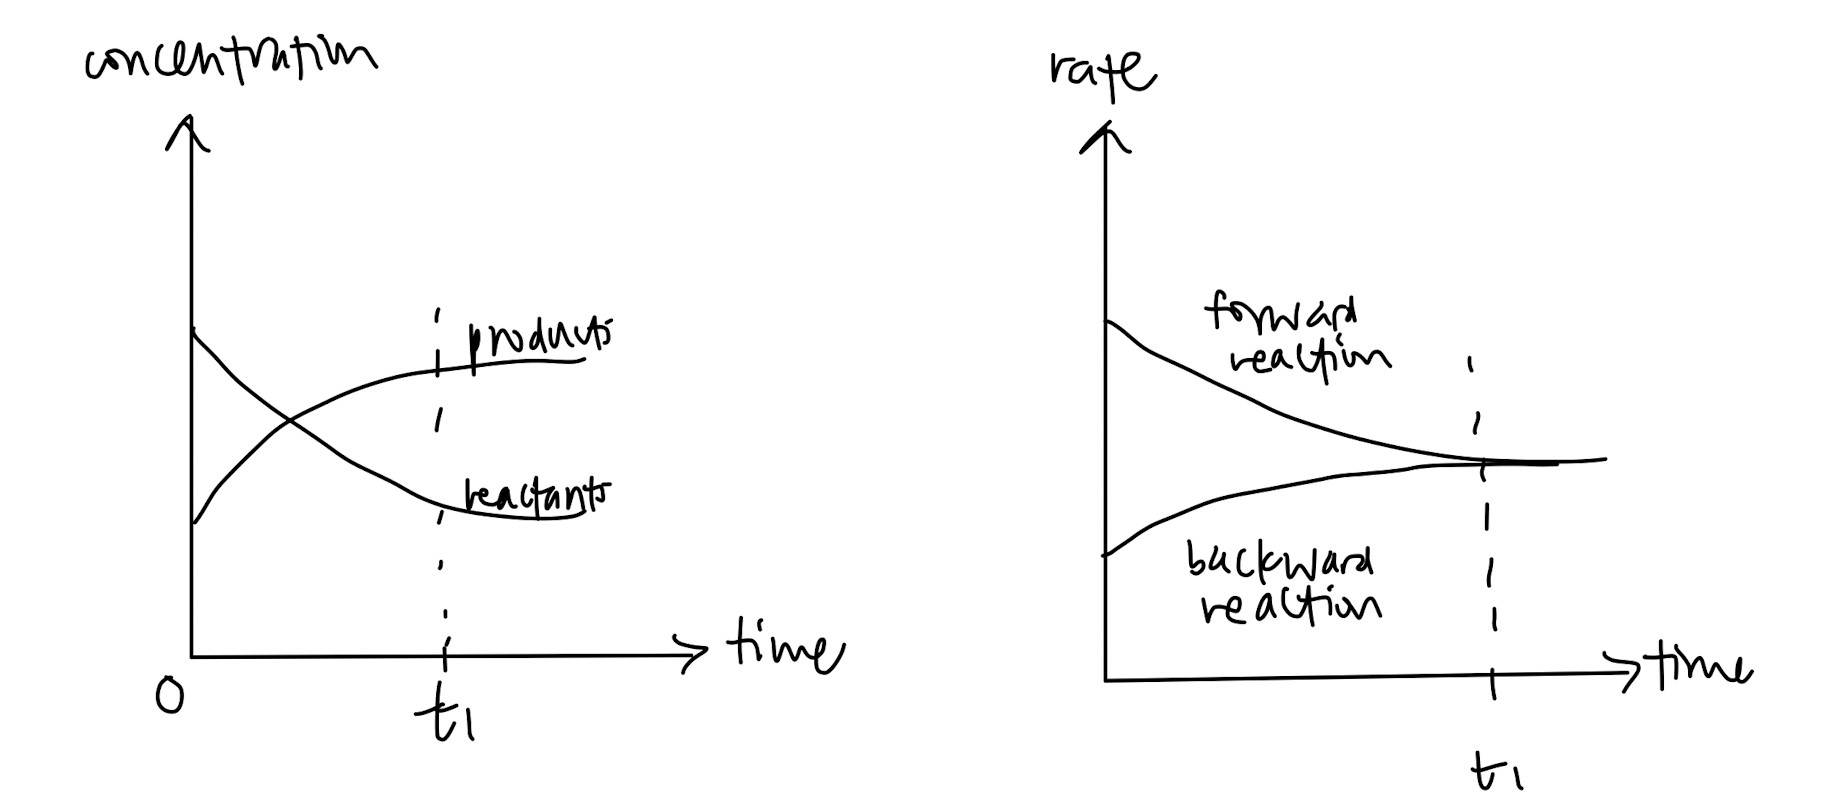 concentration-time graph and rate-time graph